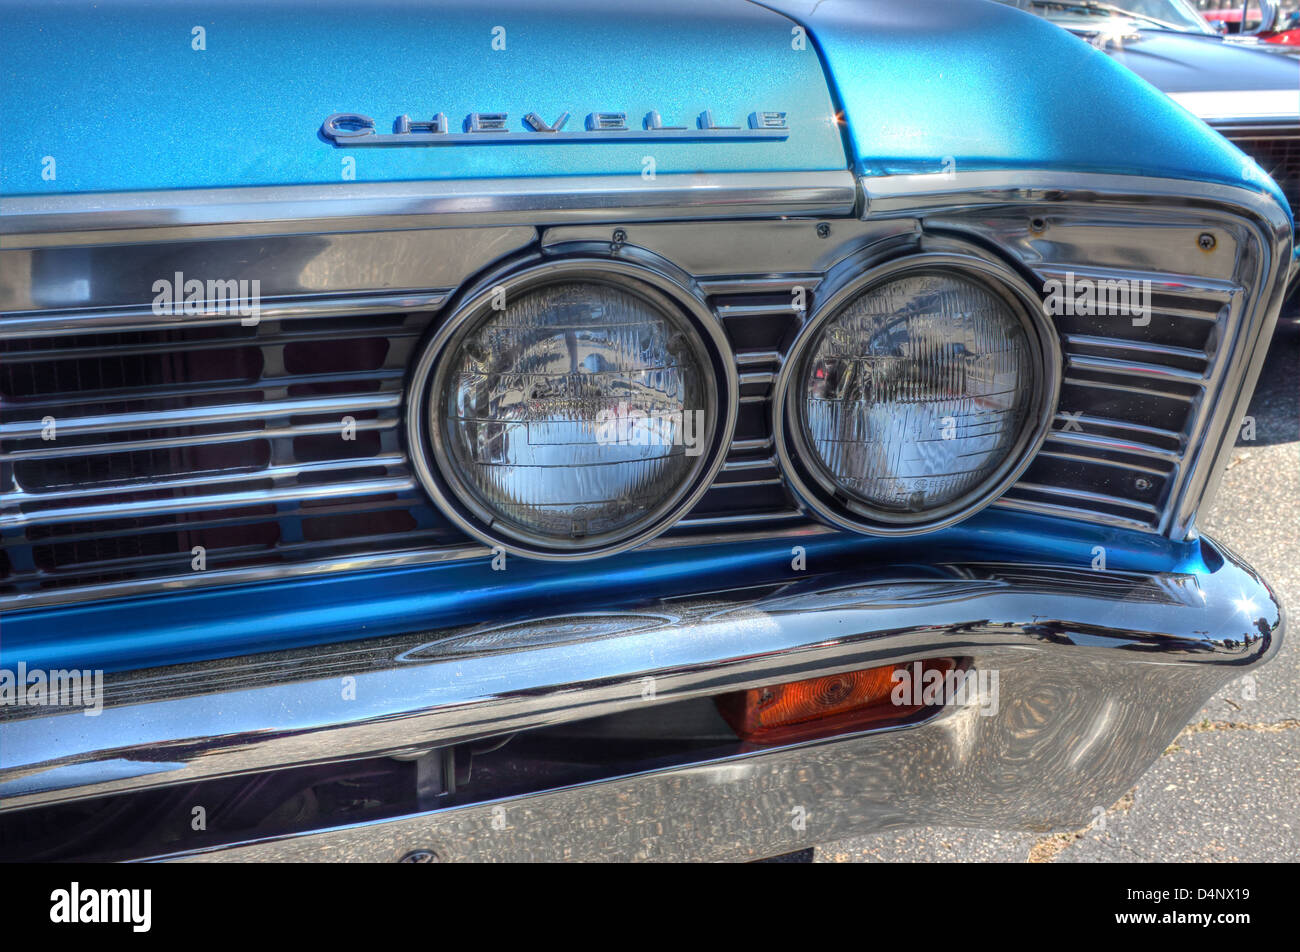 A classic Chevrolet Chevelle muscle car front grill and headlights close up. Stock Photo